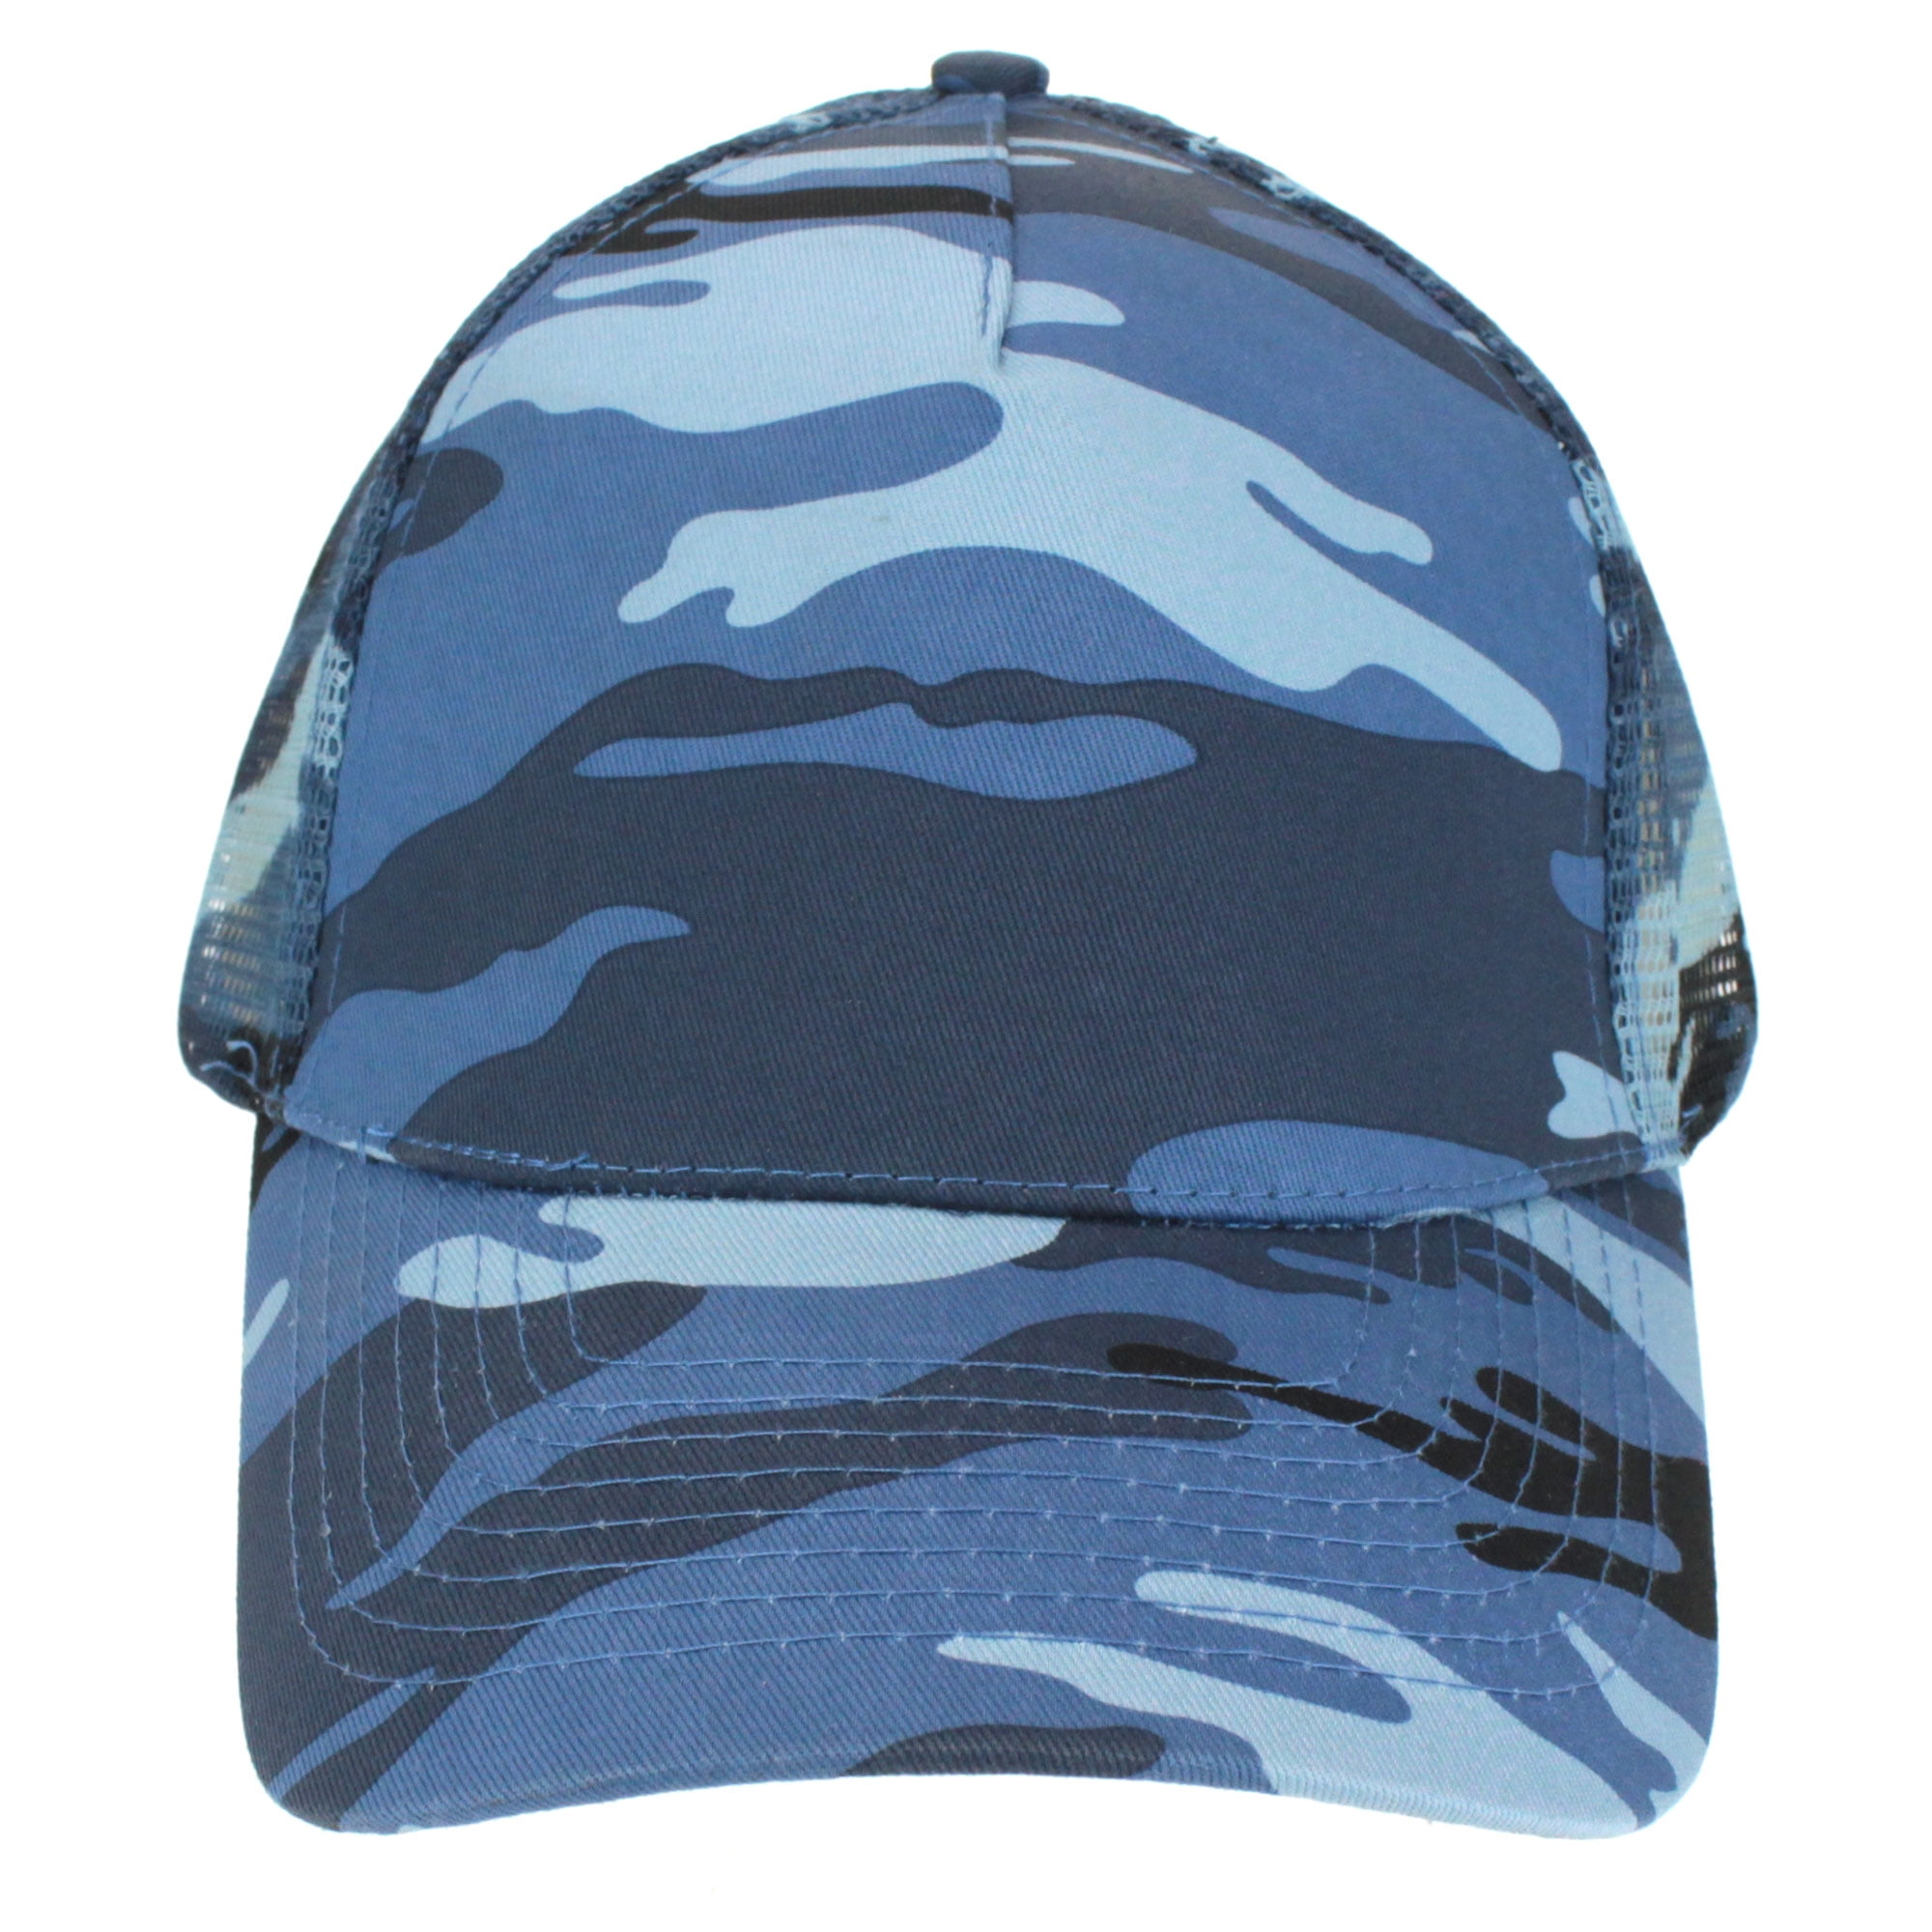 Mens Low Crown 5 Panel Camouflage Twill Mesh Trucker Hat Blue Camo 